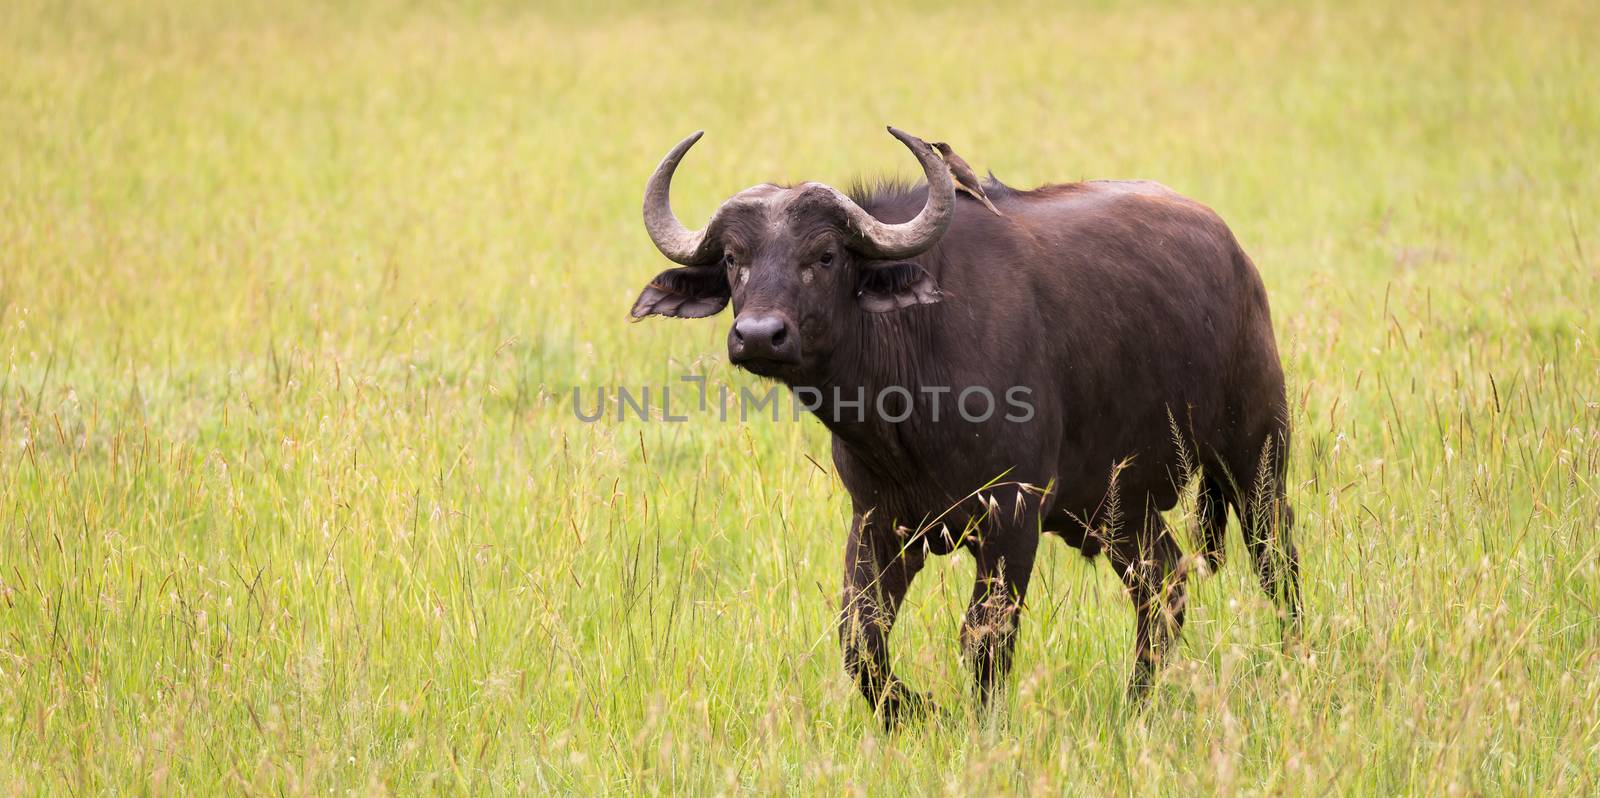 Some big Buffalos are standing in the grass and grazing in the savannah of Kenya